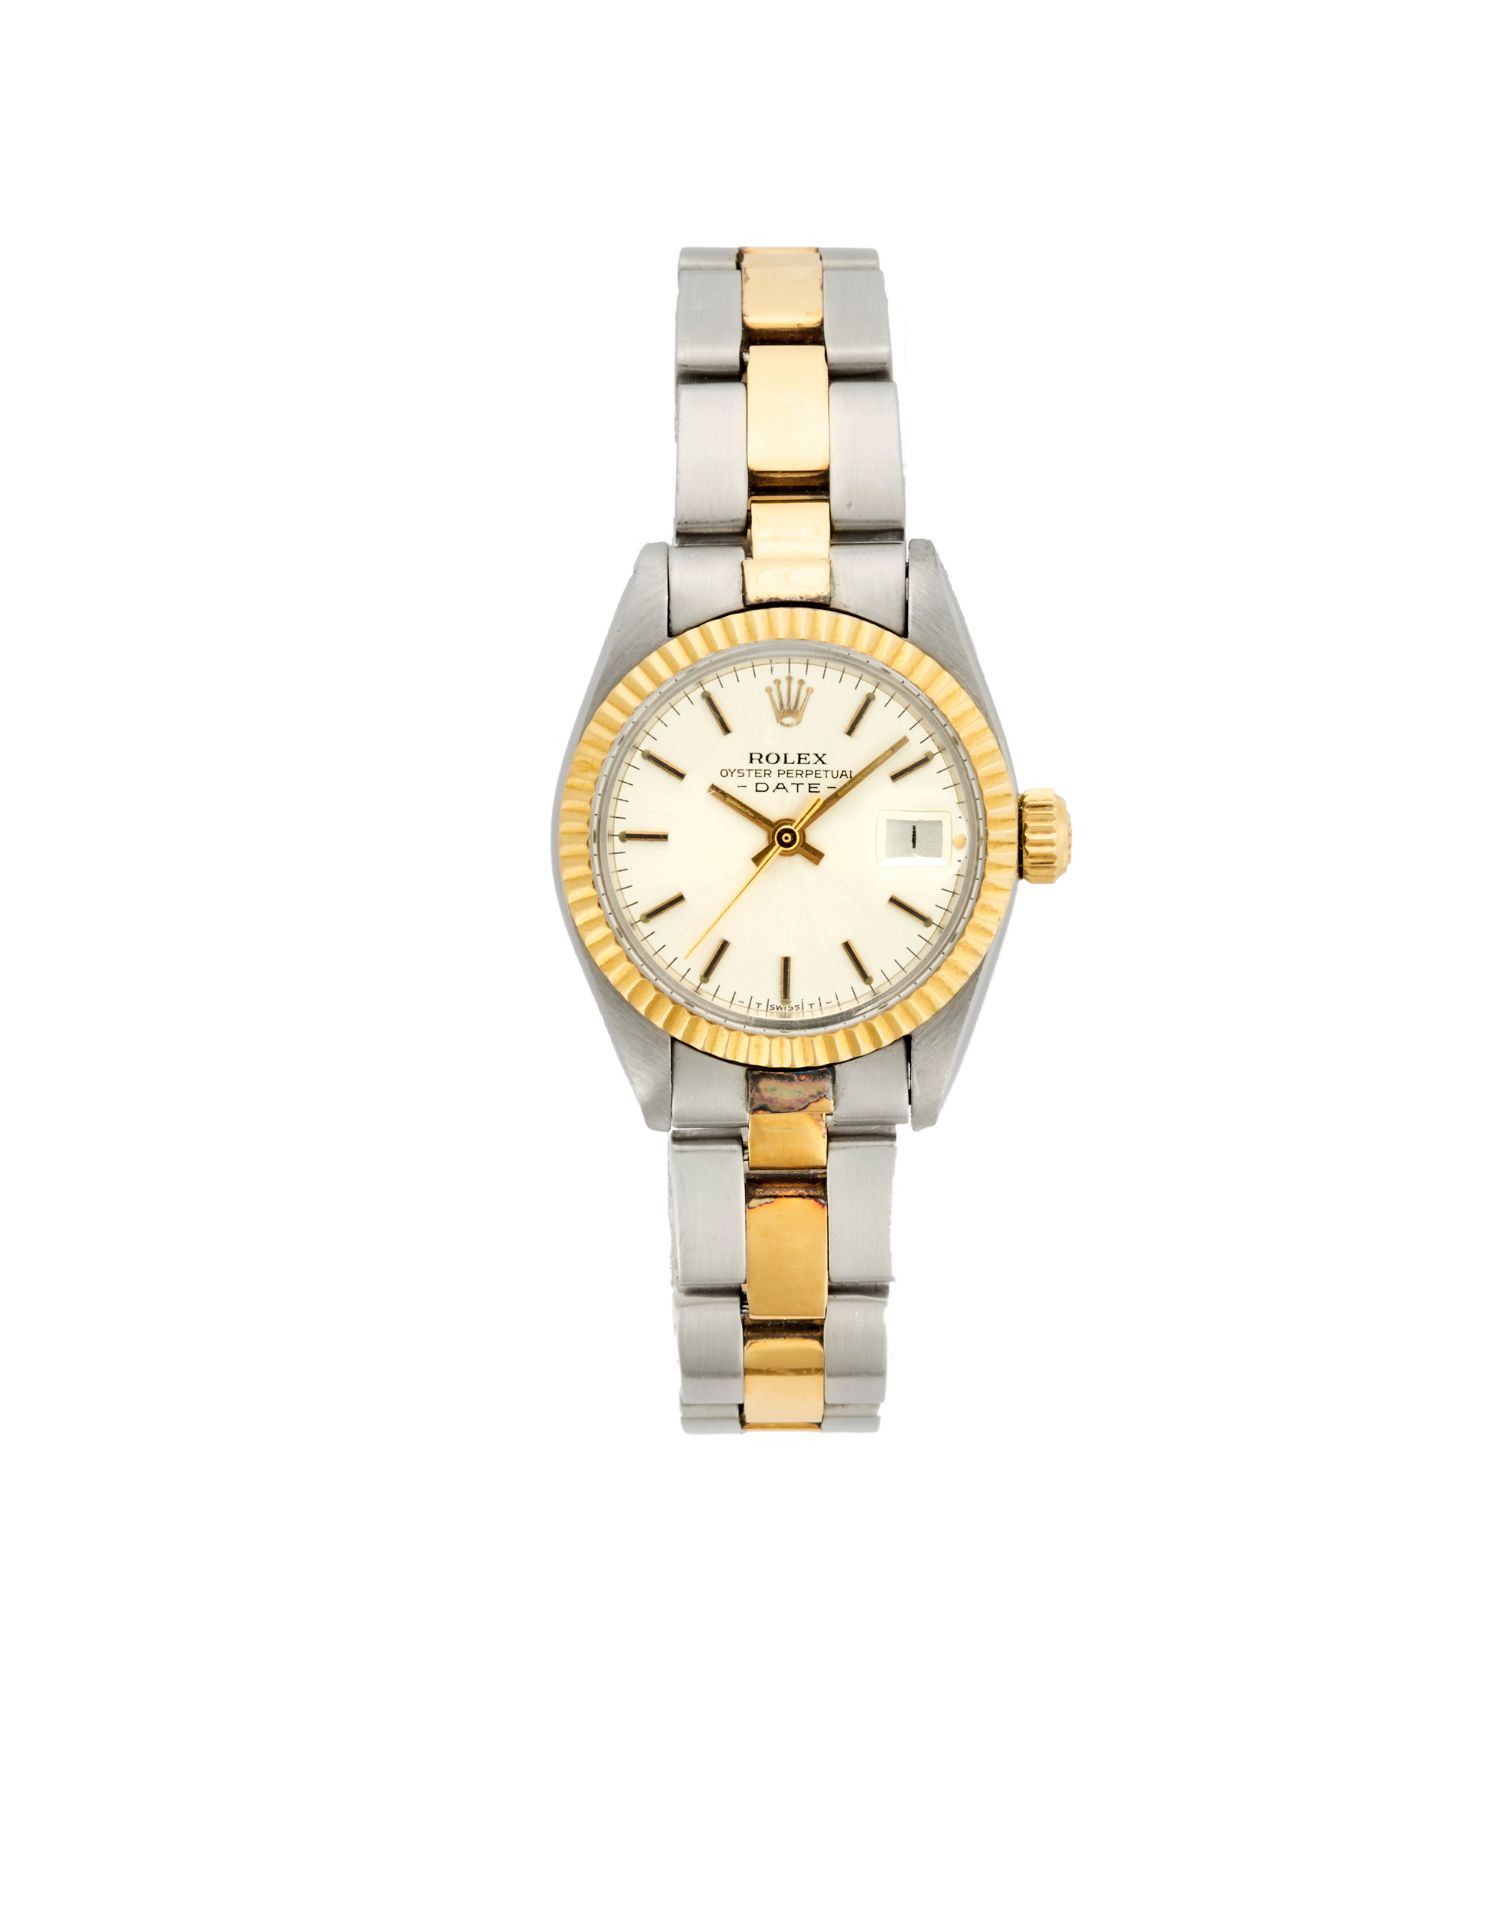 Rolex, Lady Date Ref. 6916Lady's steel and gold wristwatch1970sDial signedAutomatic movementSilvered